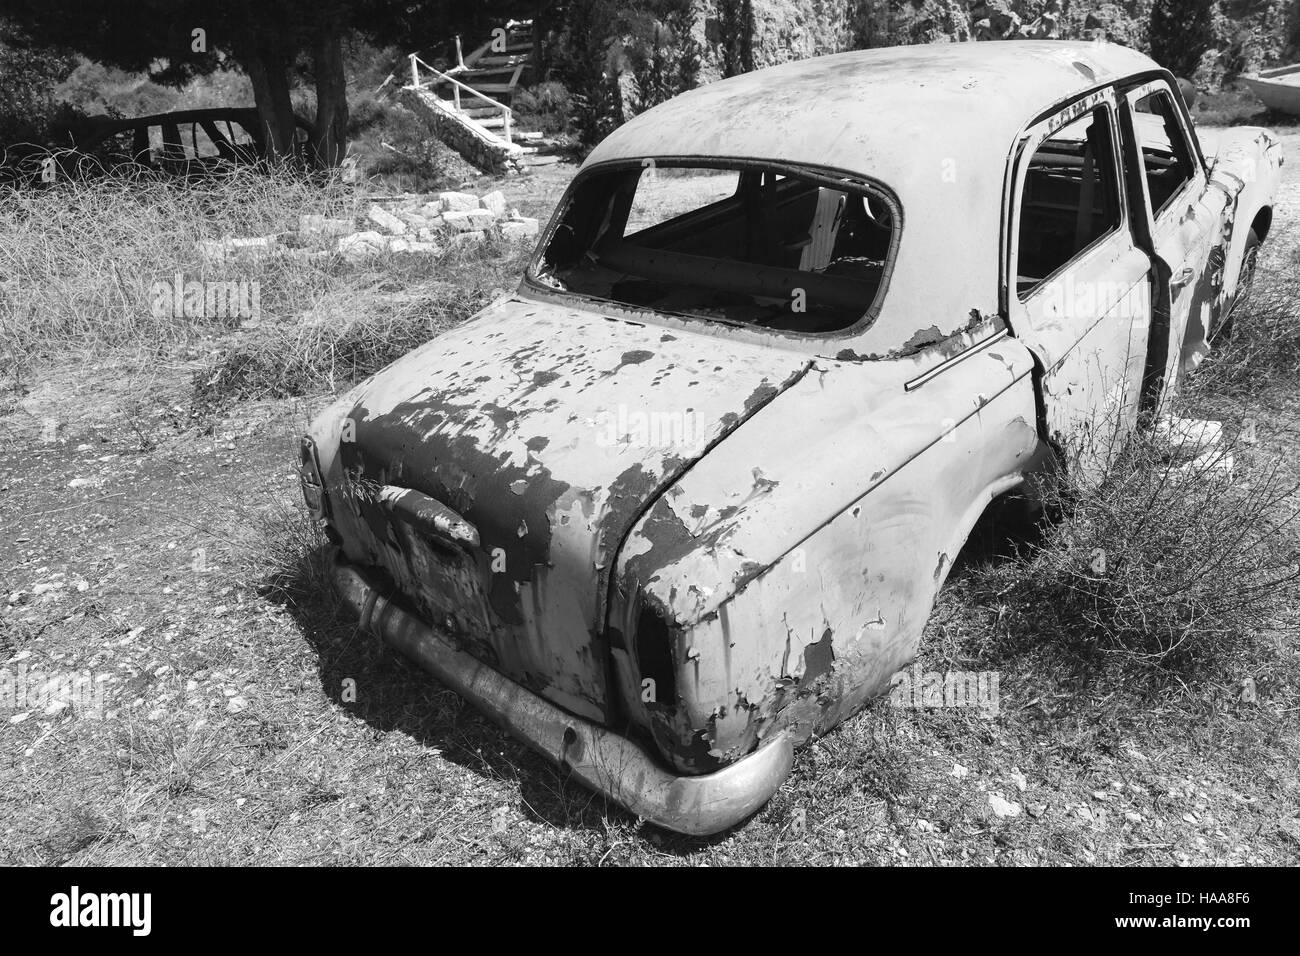 Zakynthos, Greece - August 20, 2016: Old abandoned rusted car stands in summer garden, rear view, black and white Stock Photo